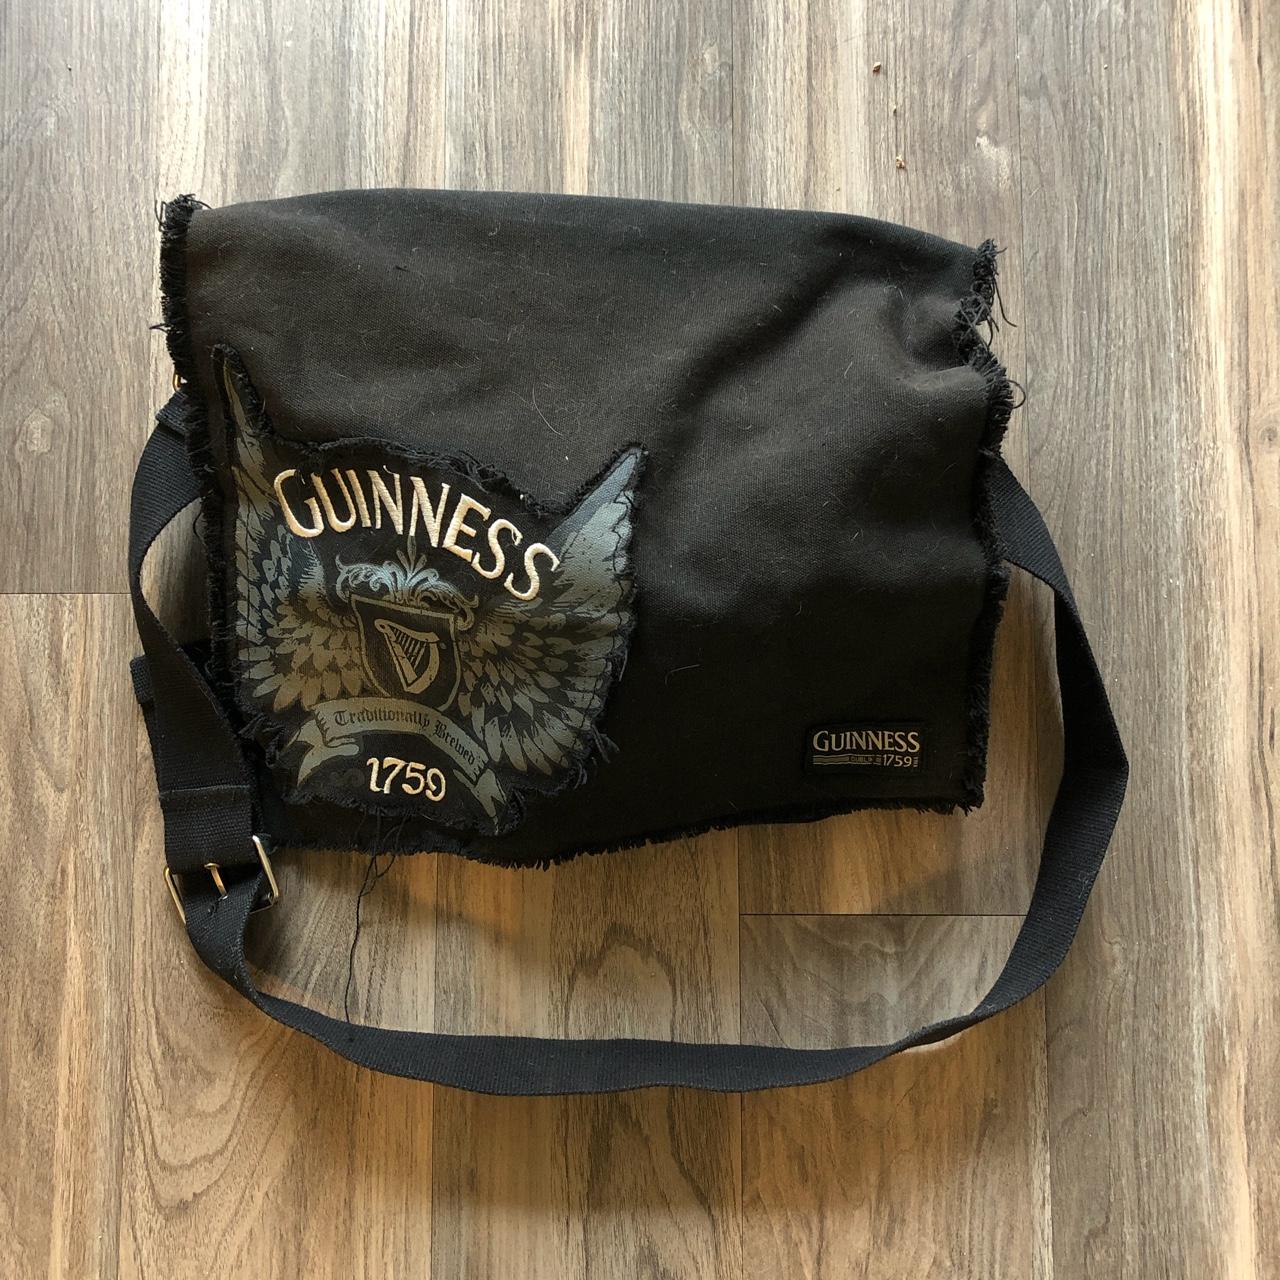 Brown Guinness Shoulder Bag With Wings Design